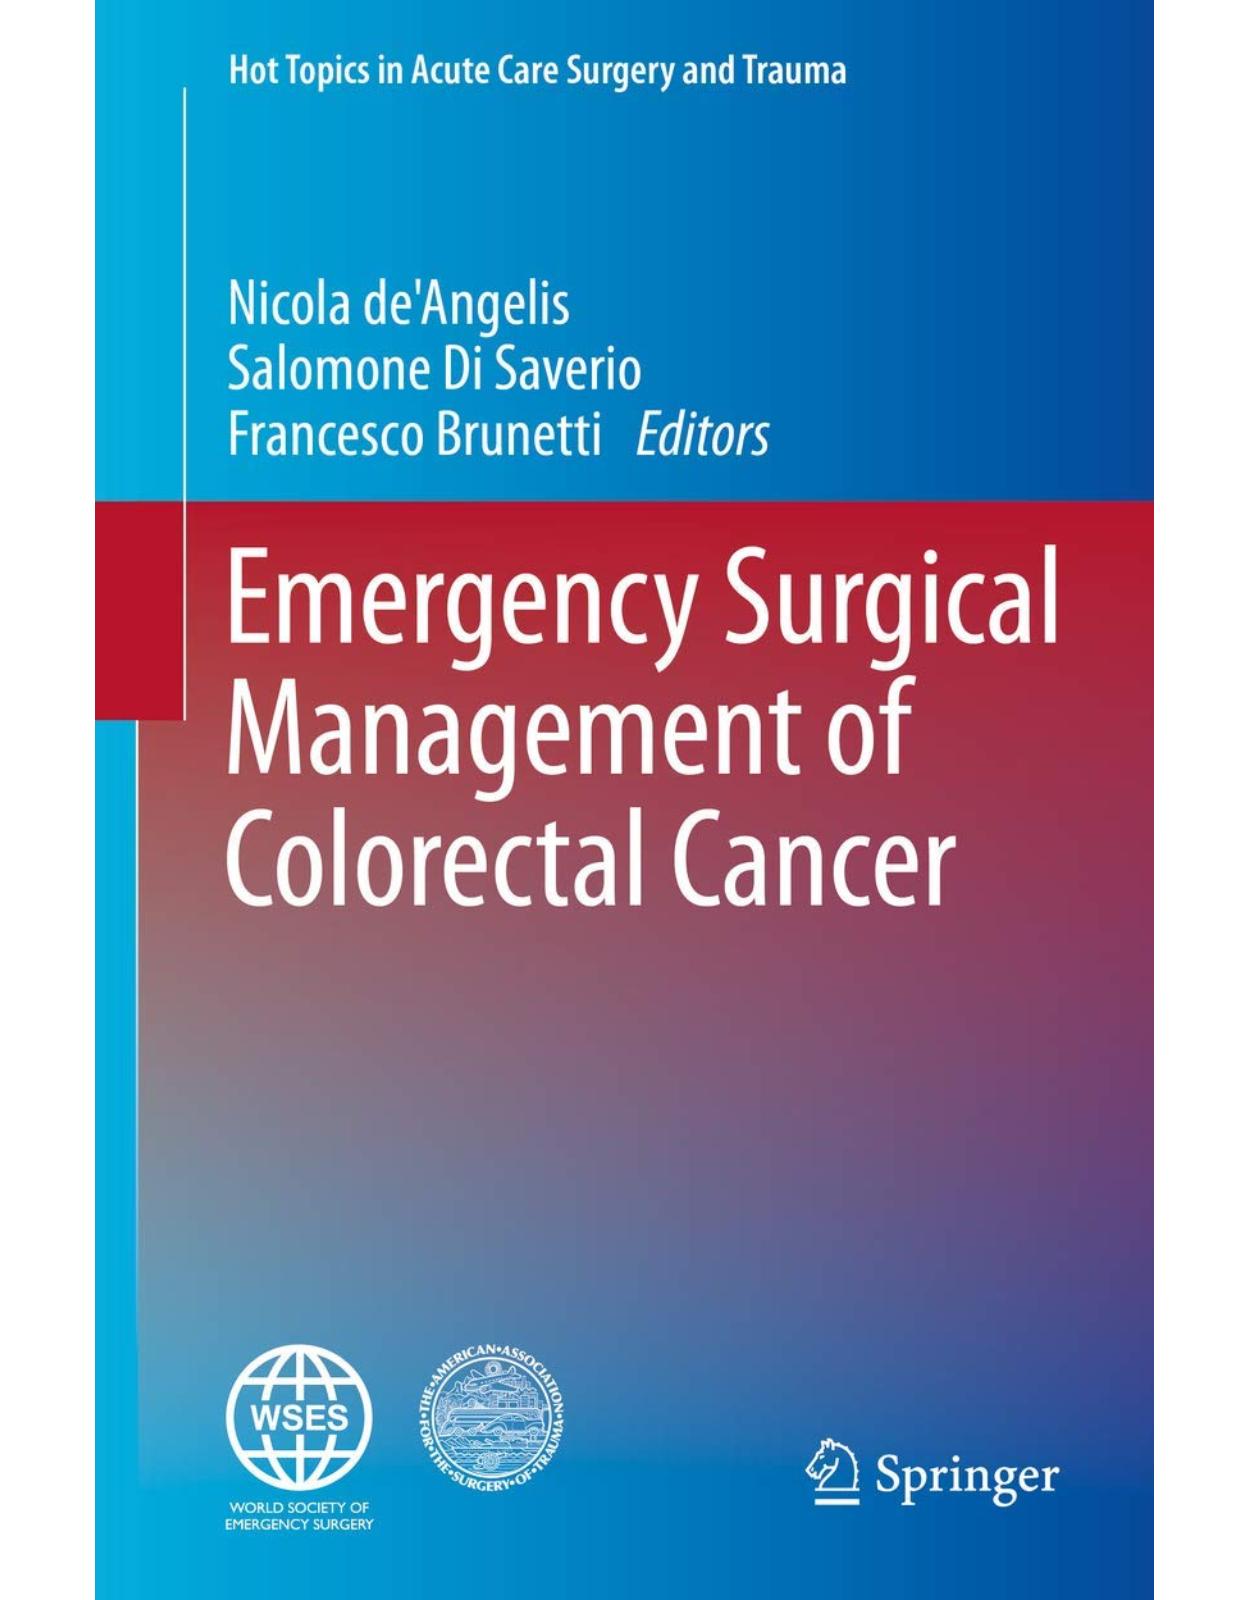 Emergency Surgical Management of Colorectal Cancer (Hot Topics in Acute Care Surgery and Trauma)